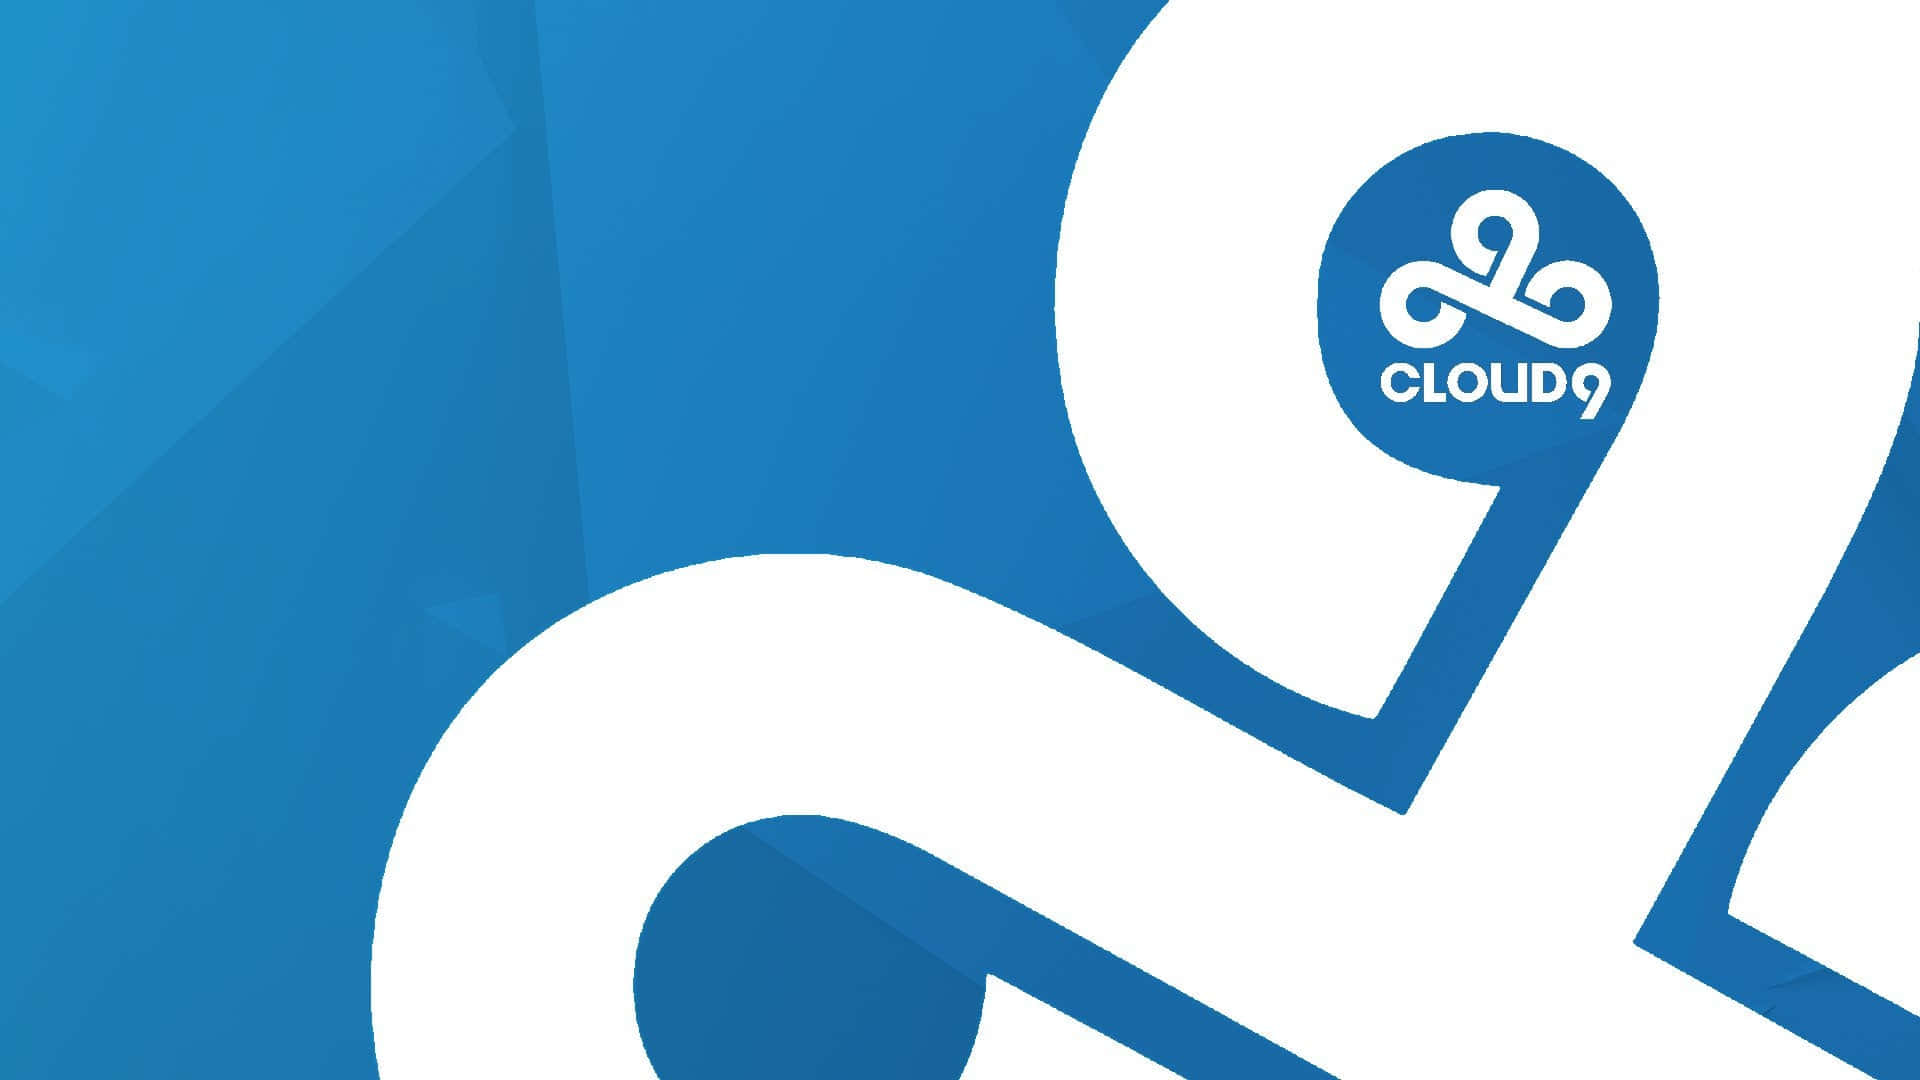 Reach the ultimate heights with Cloud 9! Wallpaper